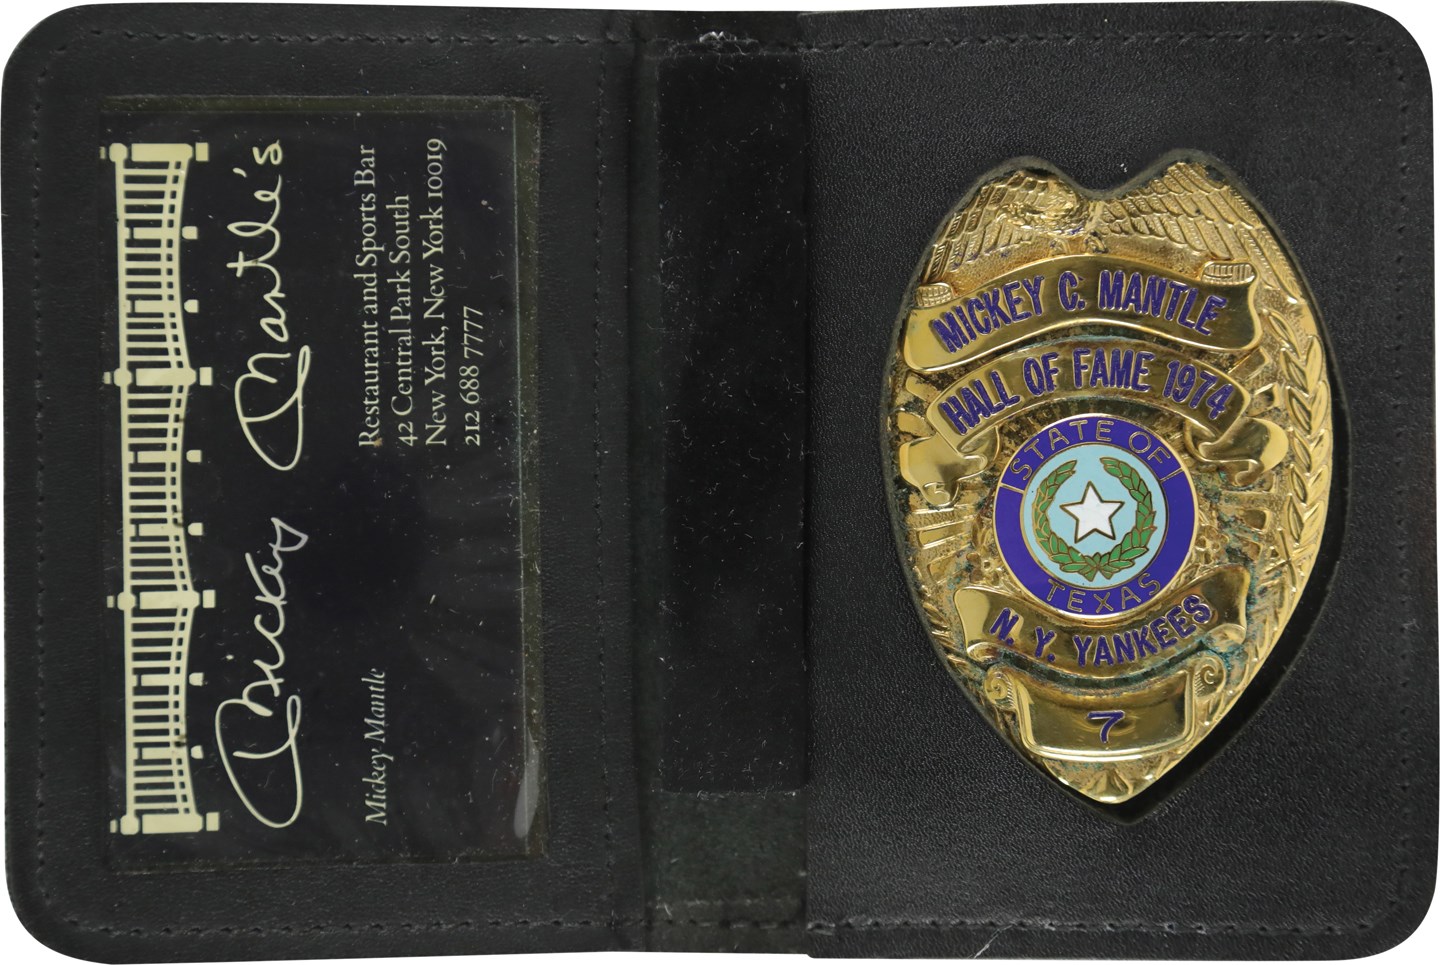 - Mickey Mantle Honorary Texas Police Badge (Greer Johnson Collection)